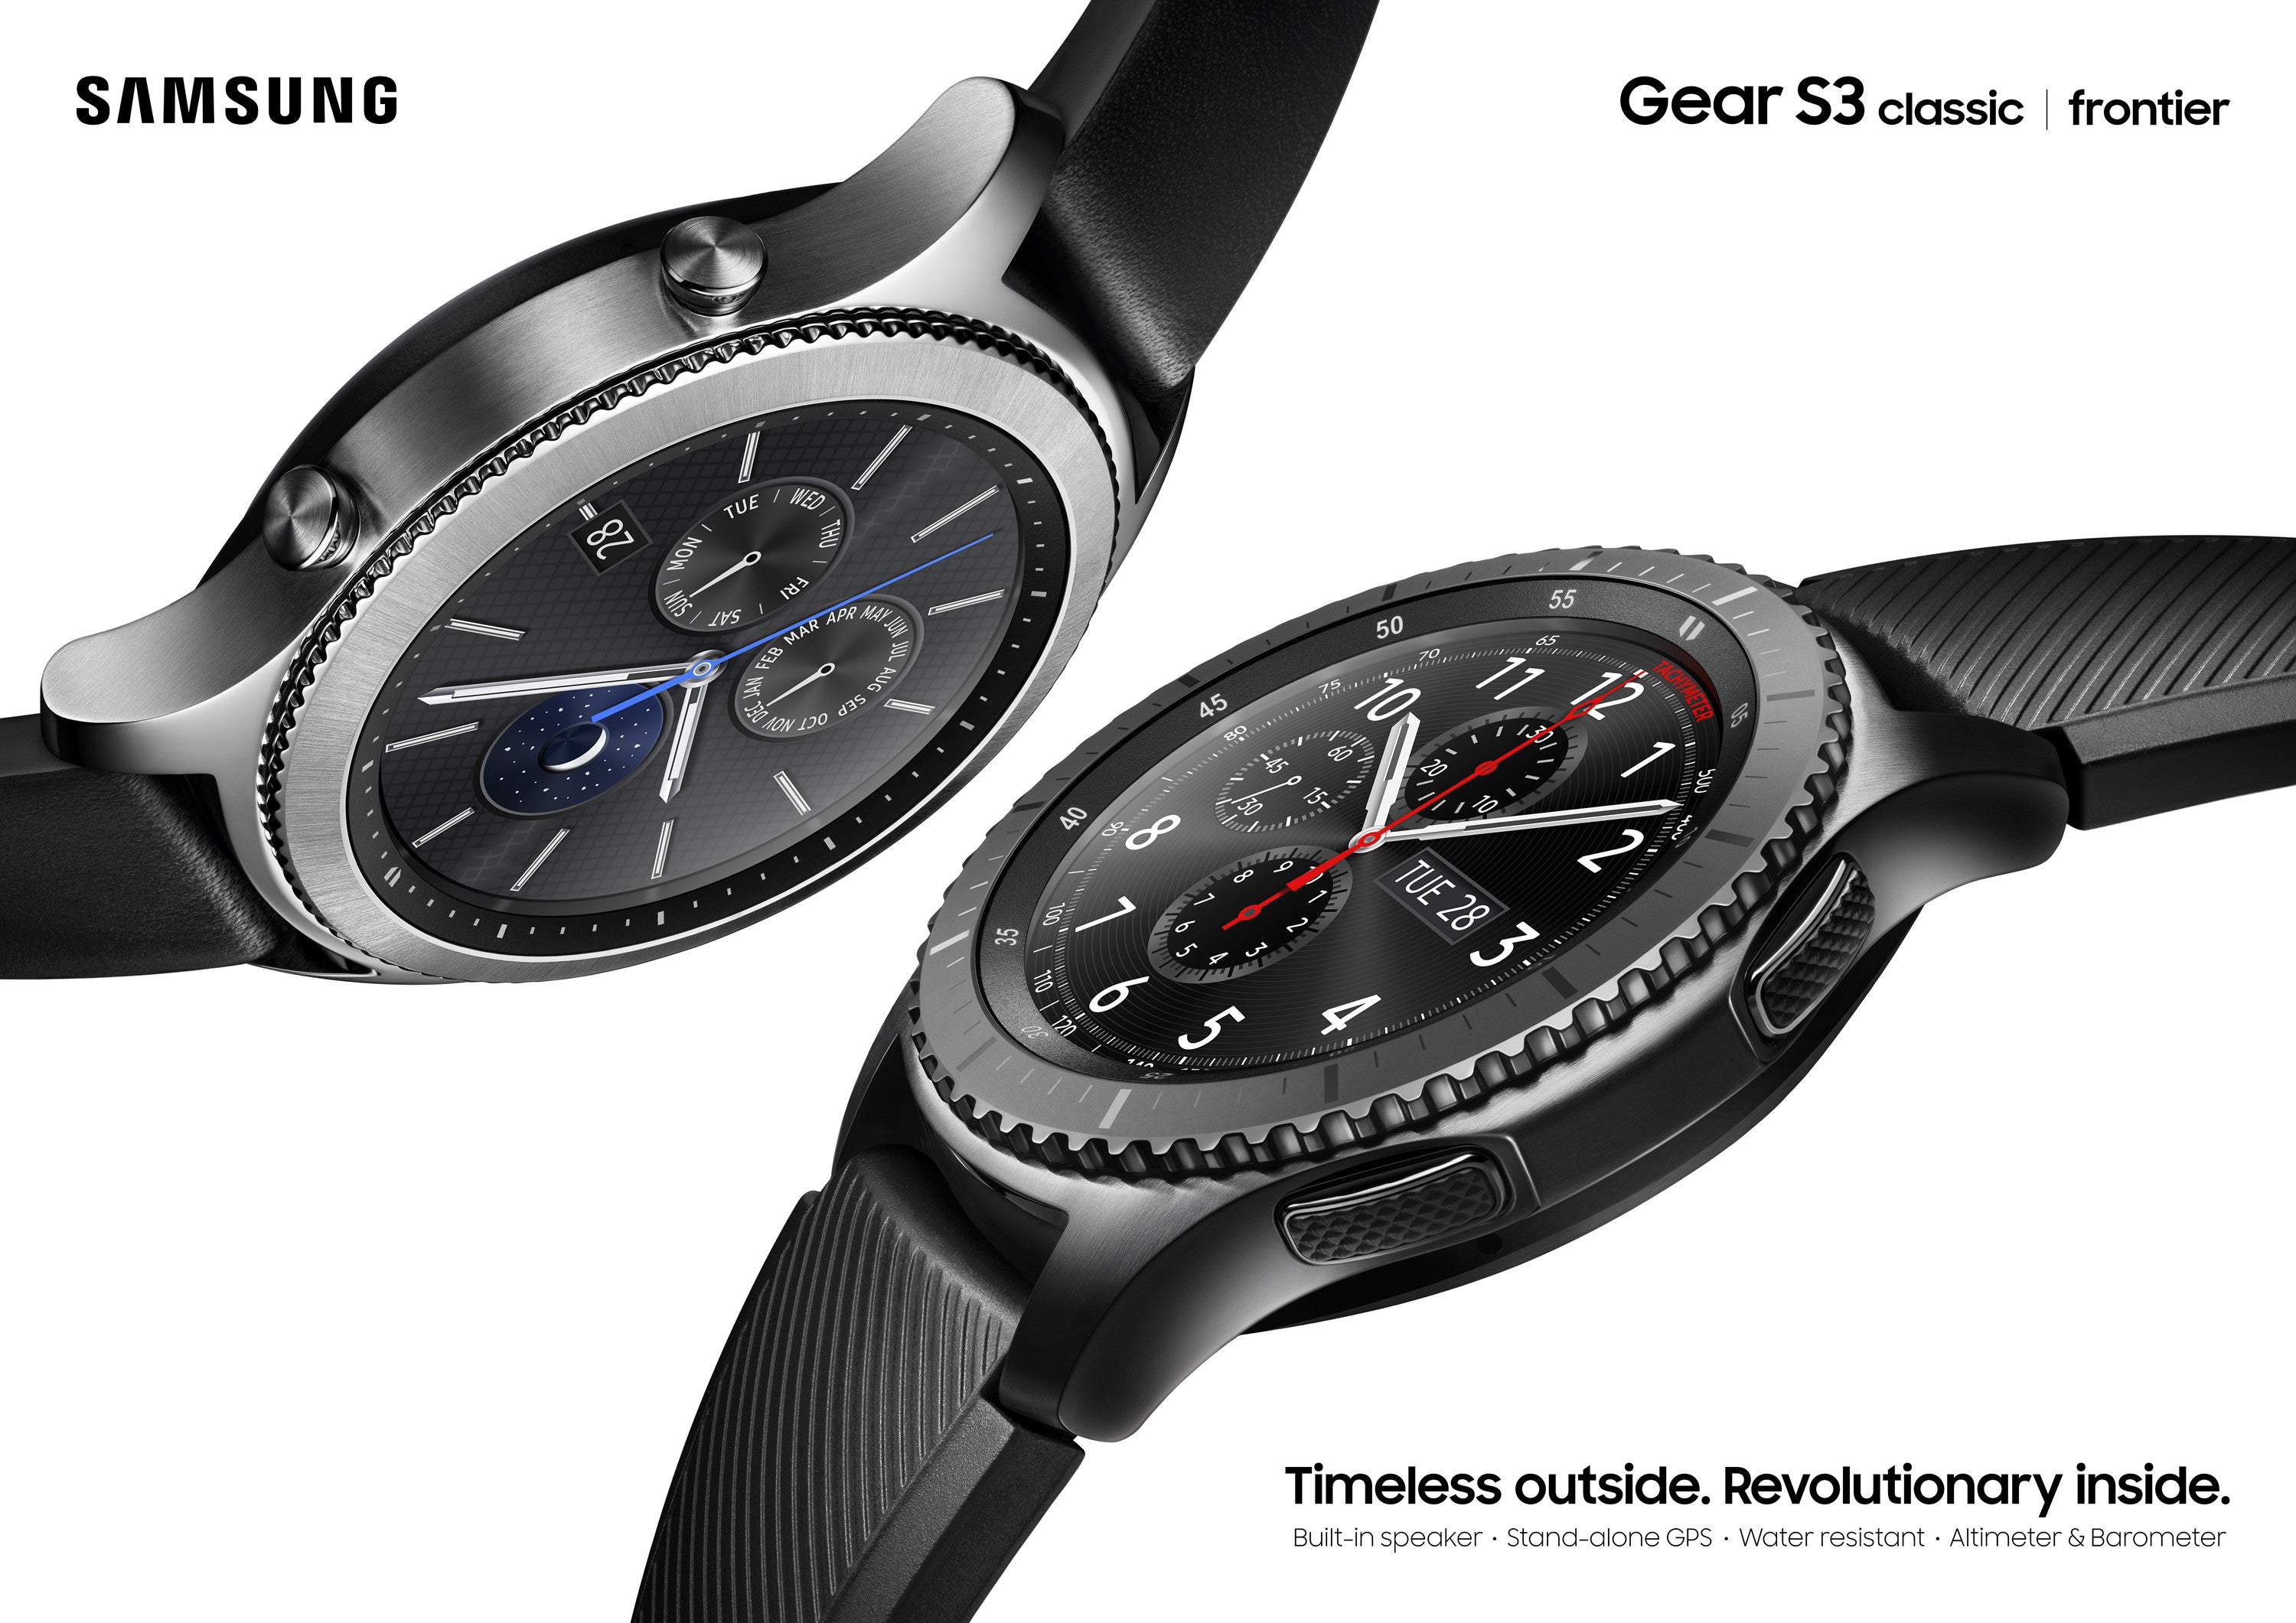 The Samsung Gear S3 is heading to the US and Europe next month